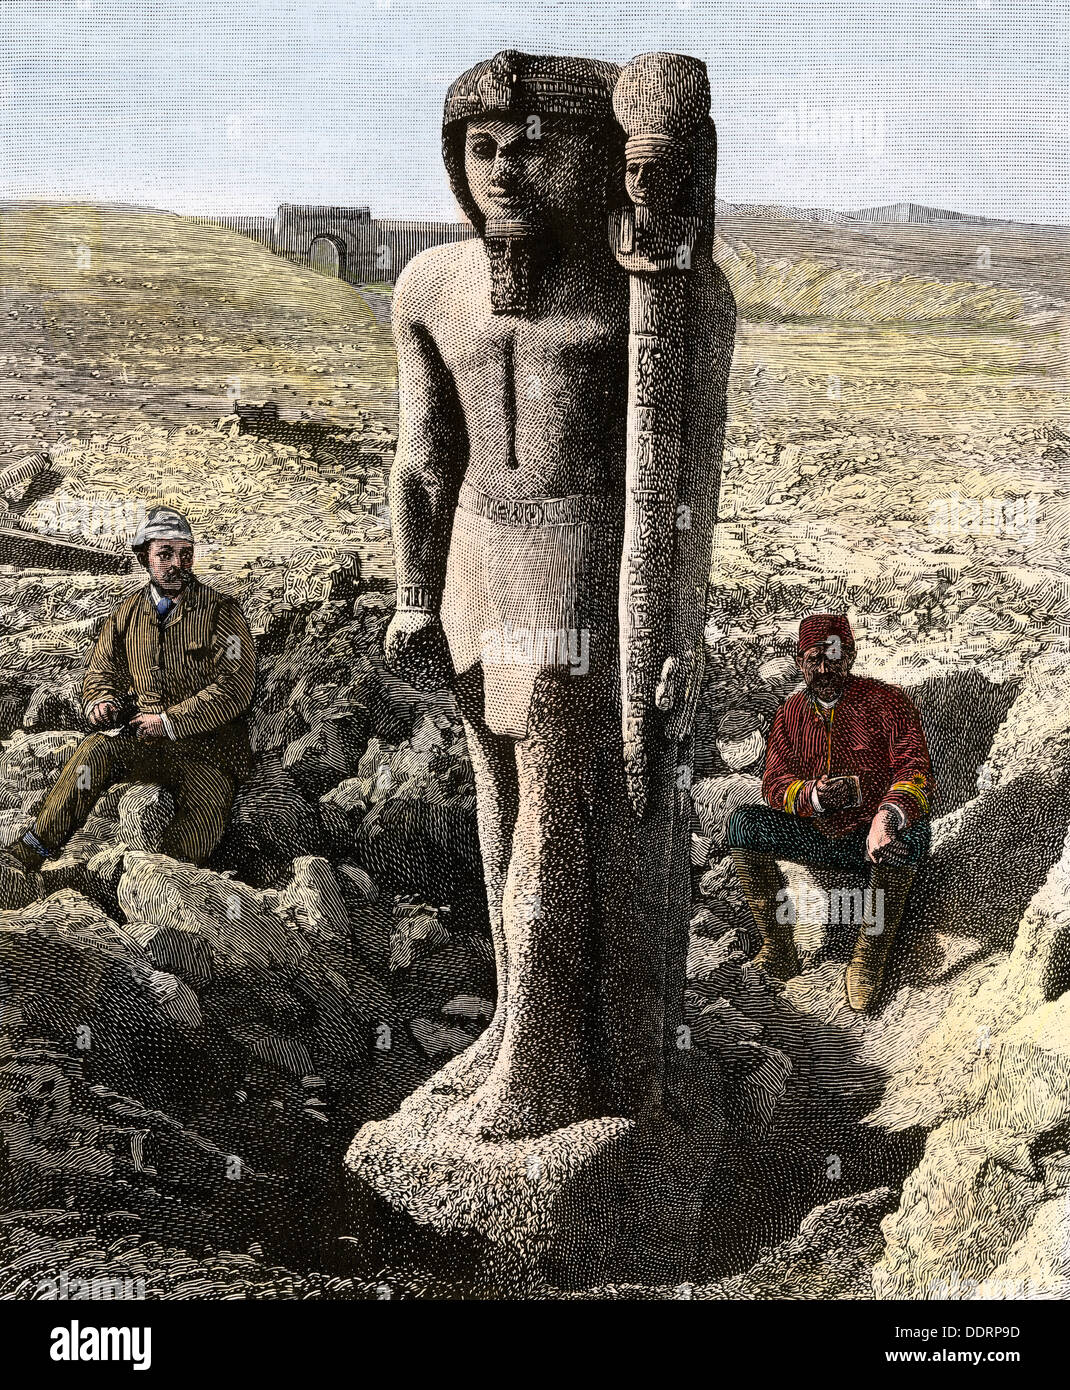 Archaeologist excavating a statue of Rameses II in Egypt, late 1800s. Hand-colored woodcut Stock Photo